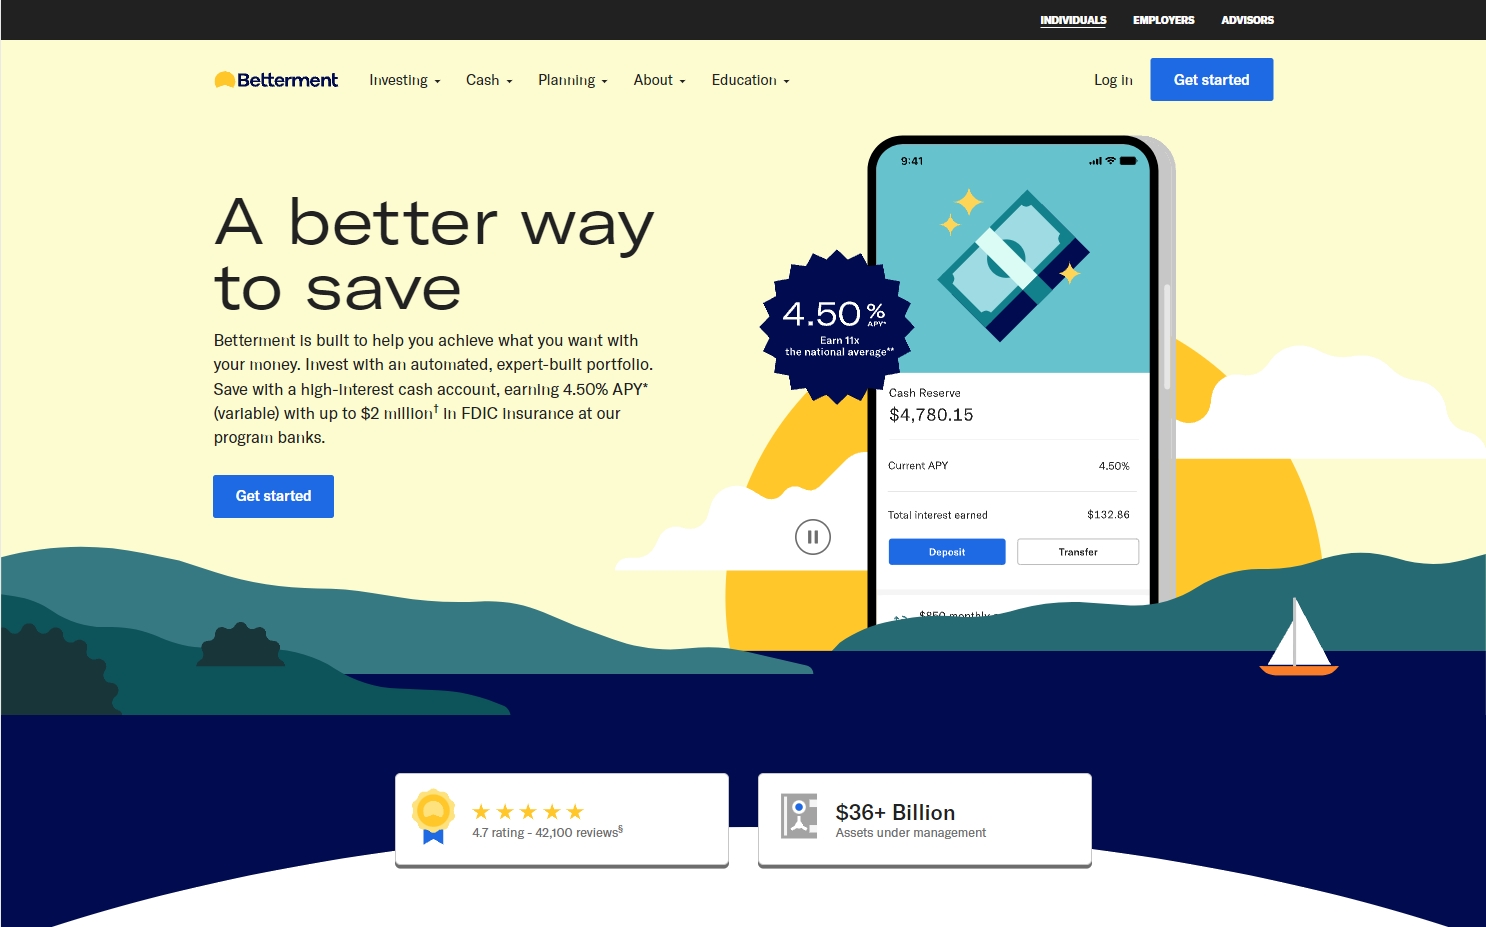 Betterment image featured